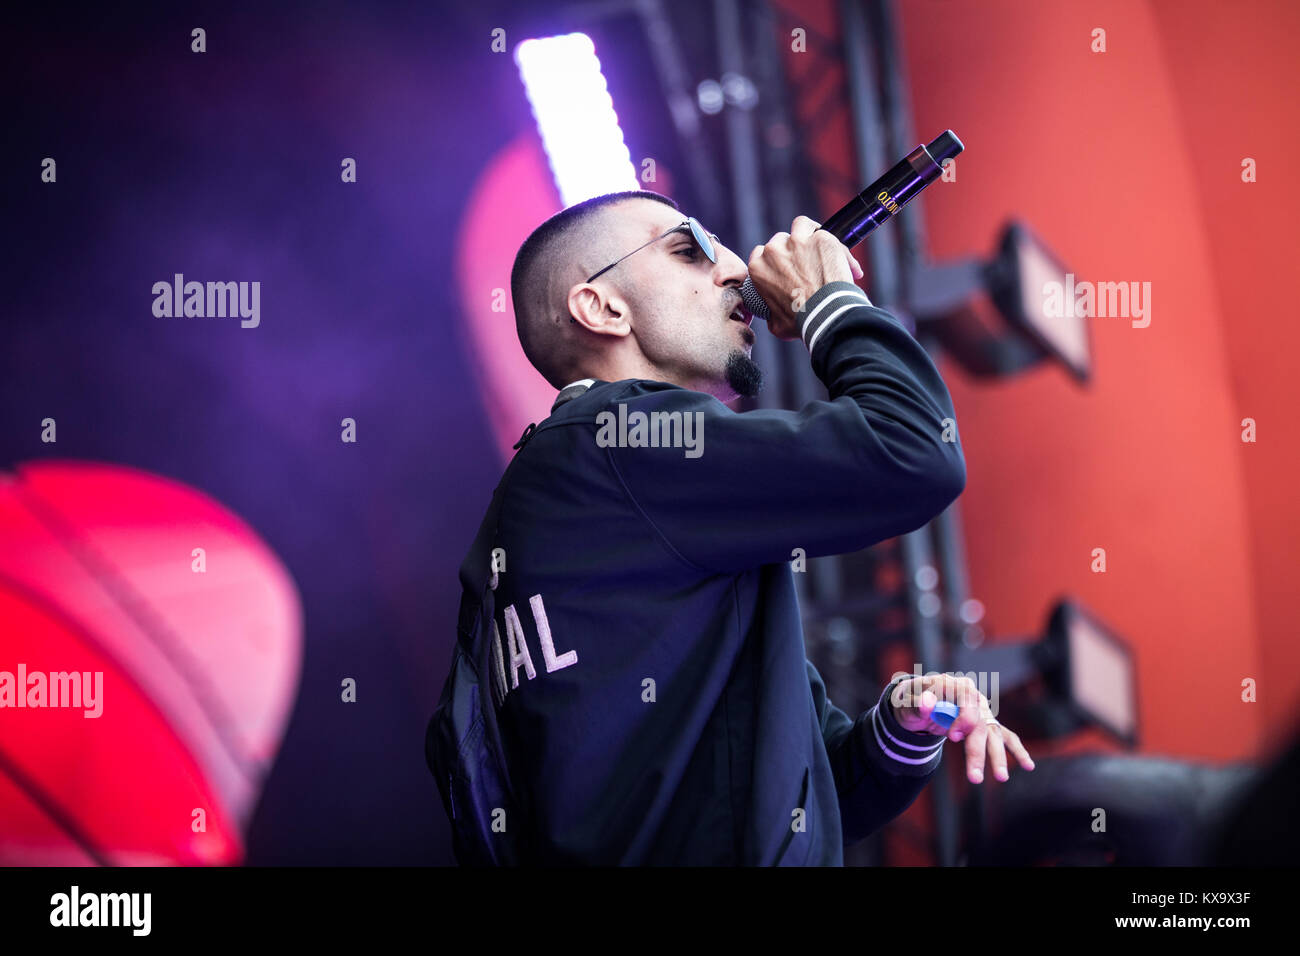 The Danish rapper Sivas (Stylized S!vas) performs a live concert at the Apollo Countdown stage at Roskilde Festival 2014. Sivas mess up the Danish dictionary combining Danish, English and Arabian in one big ghetto mixture. Denmark 02.07.2014. Stock Photo